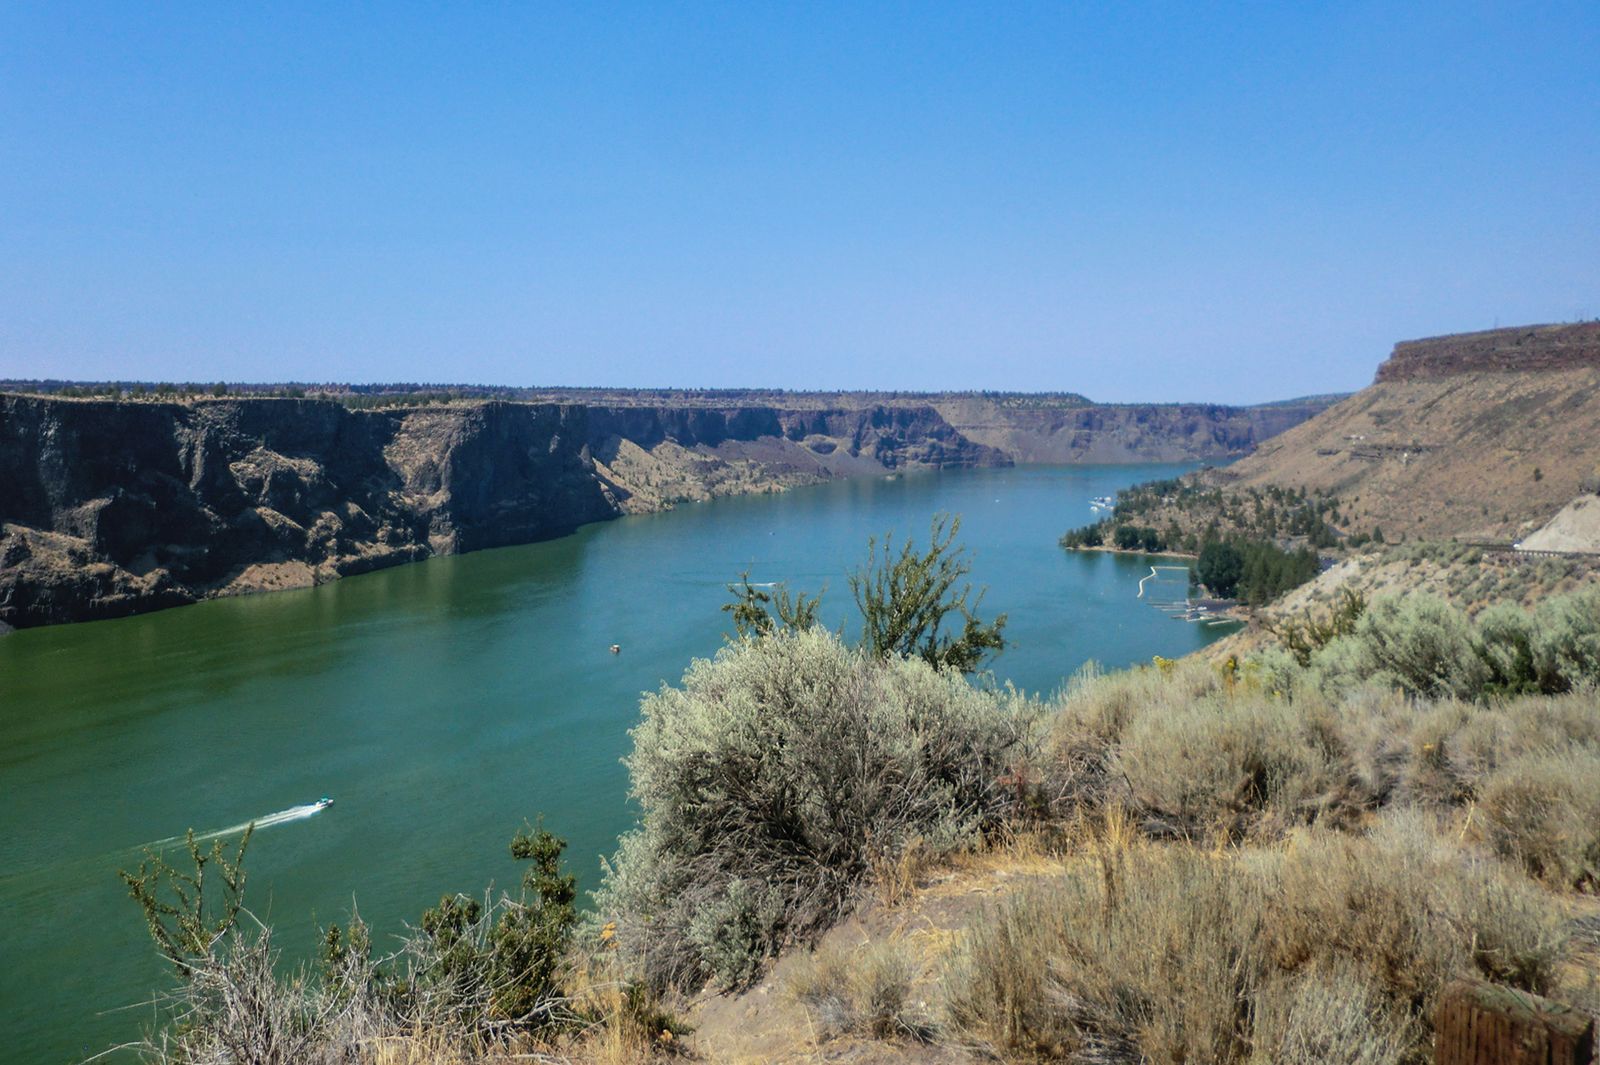 Lake Billy Chinook im Cove Palisades State Park in Oregon